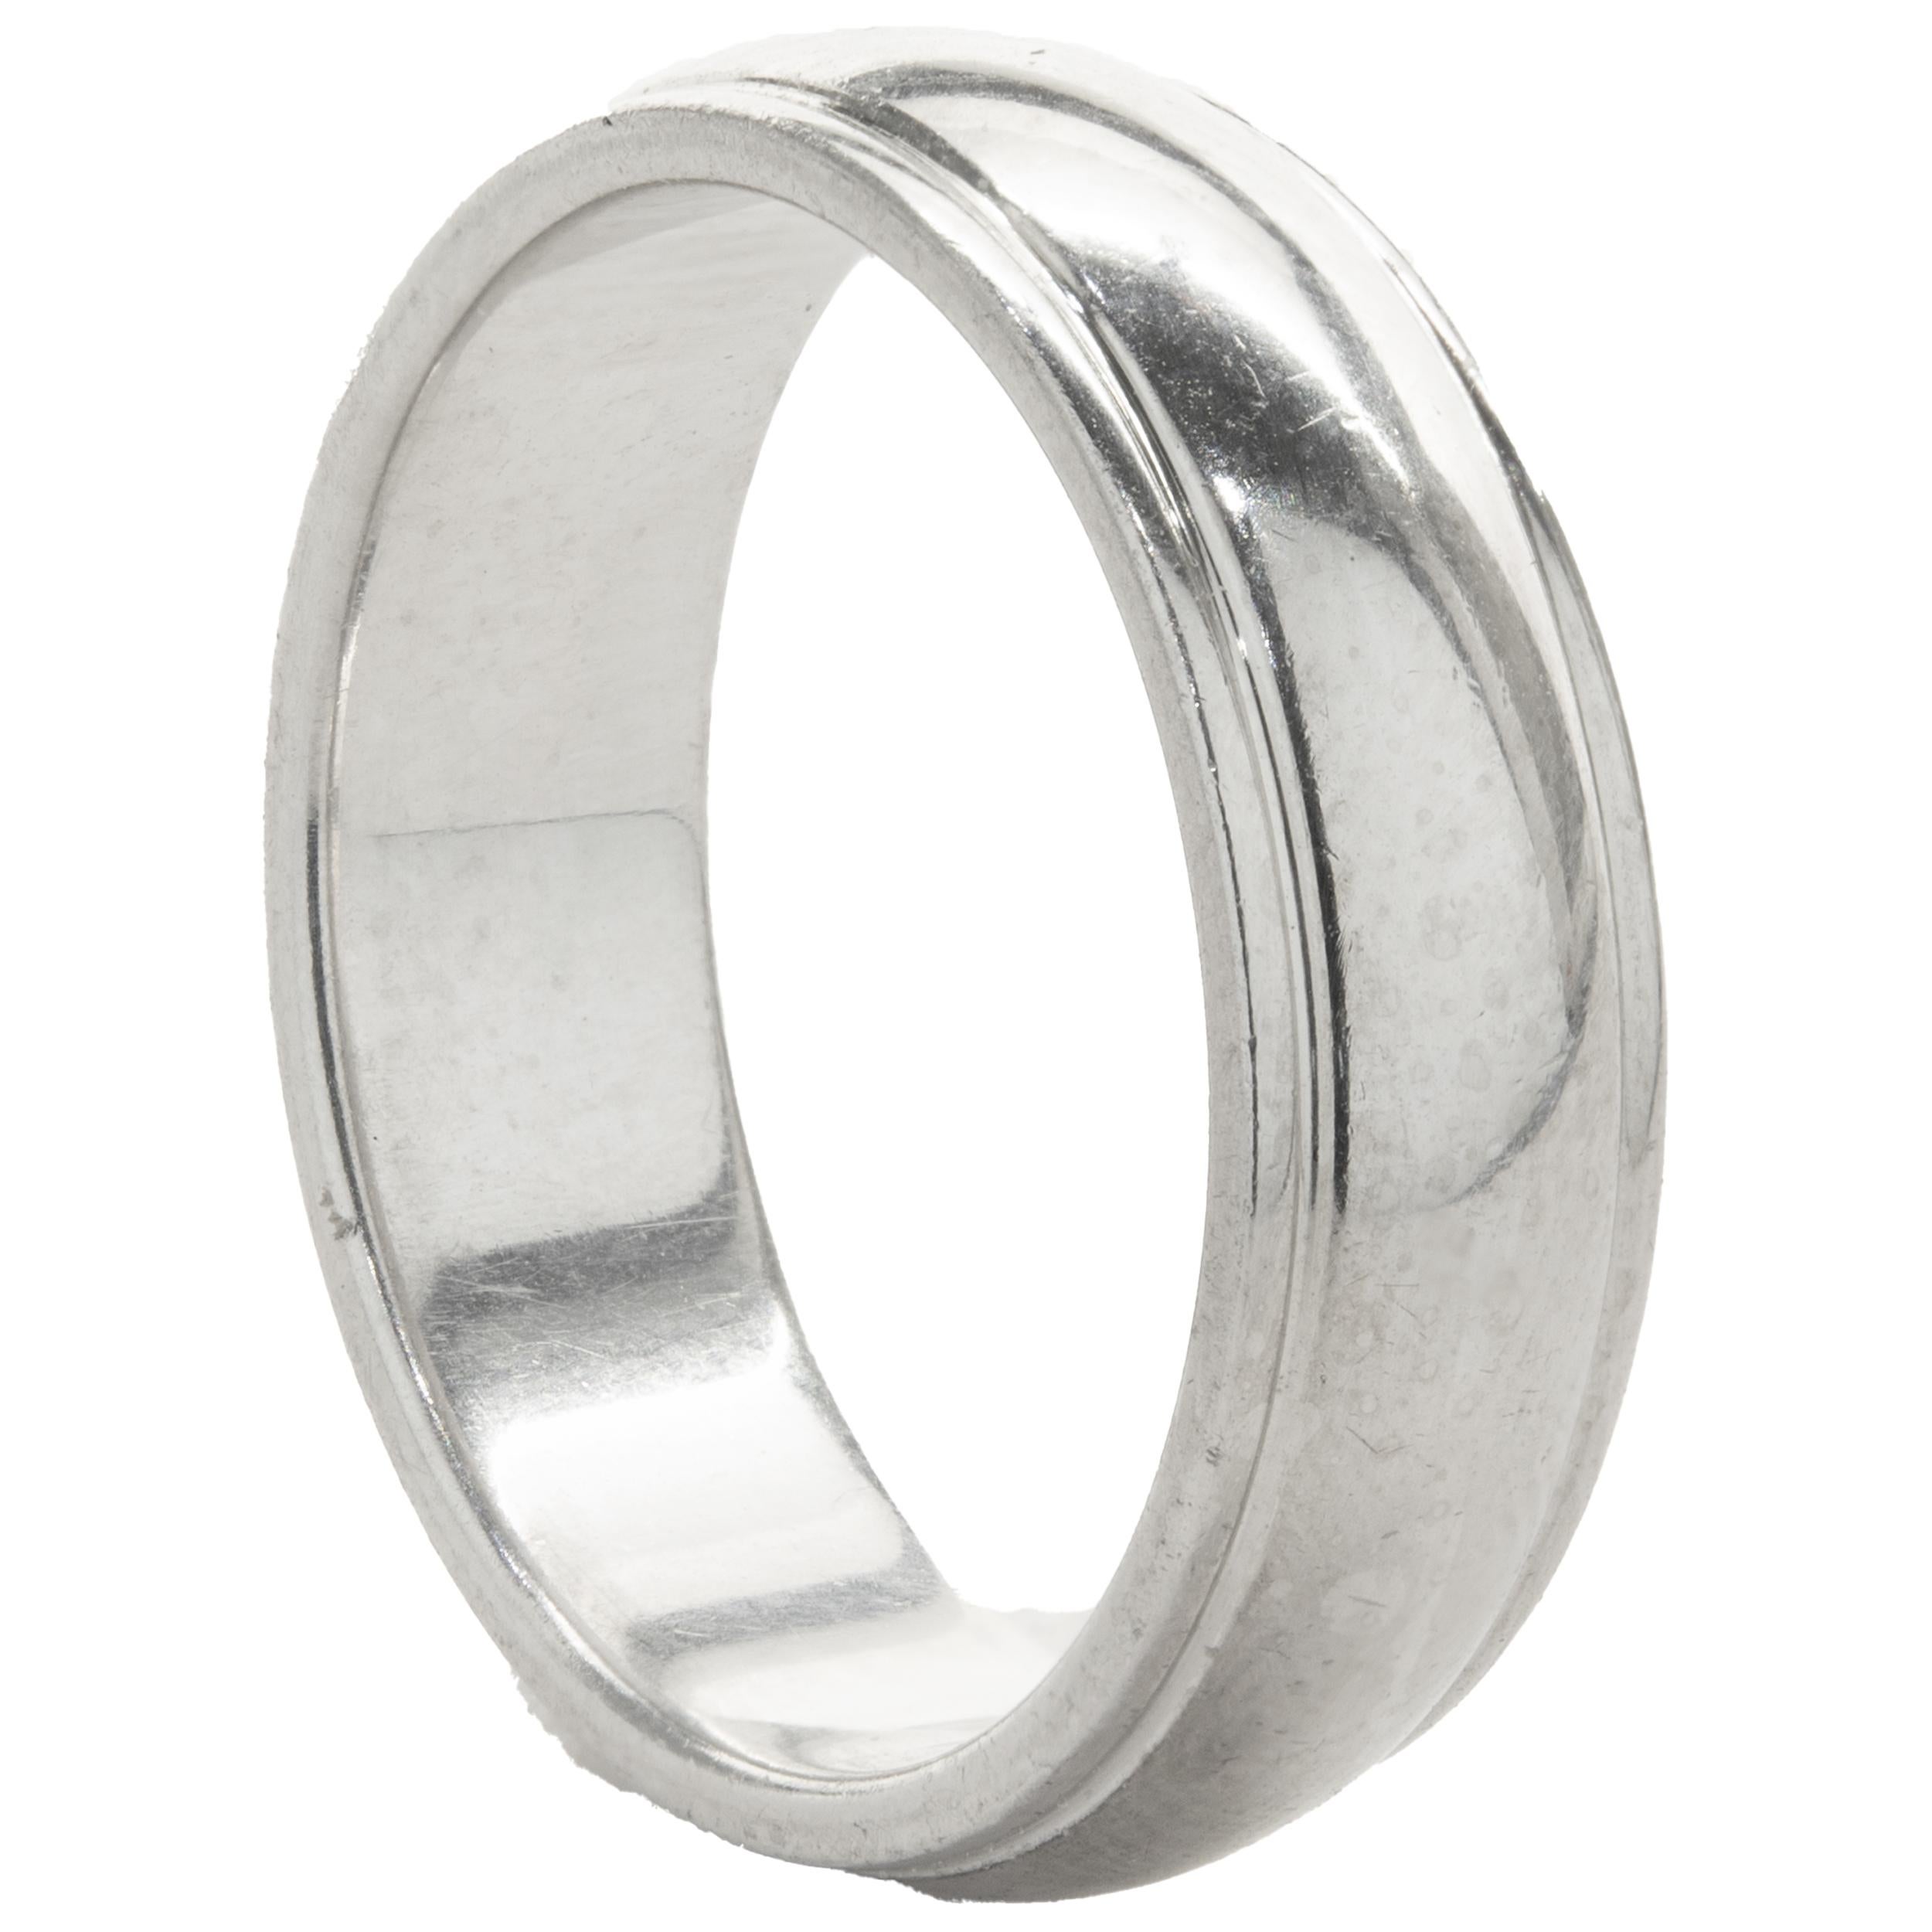 Designer: Ritani
Material: platinum
Weight: 12.16 grams
Dimensions: band measures 6mm wide
Size: 8.5 (complimentary sizing available)

Complete with original pouch and papers 